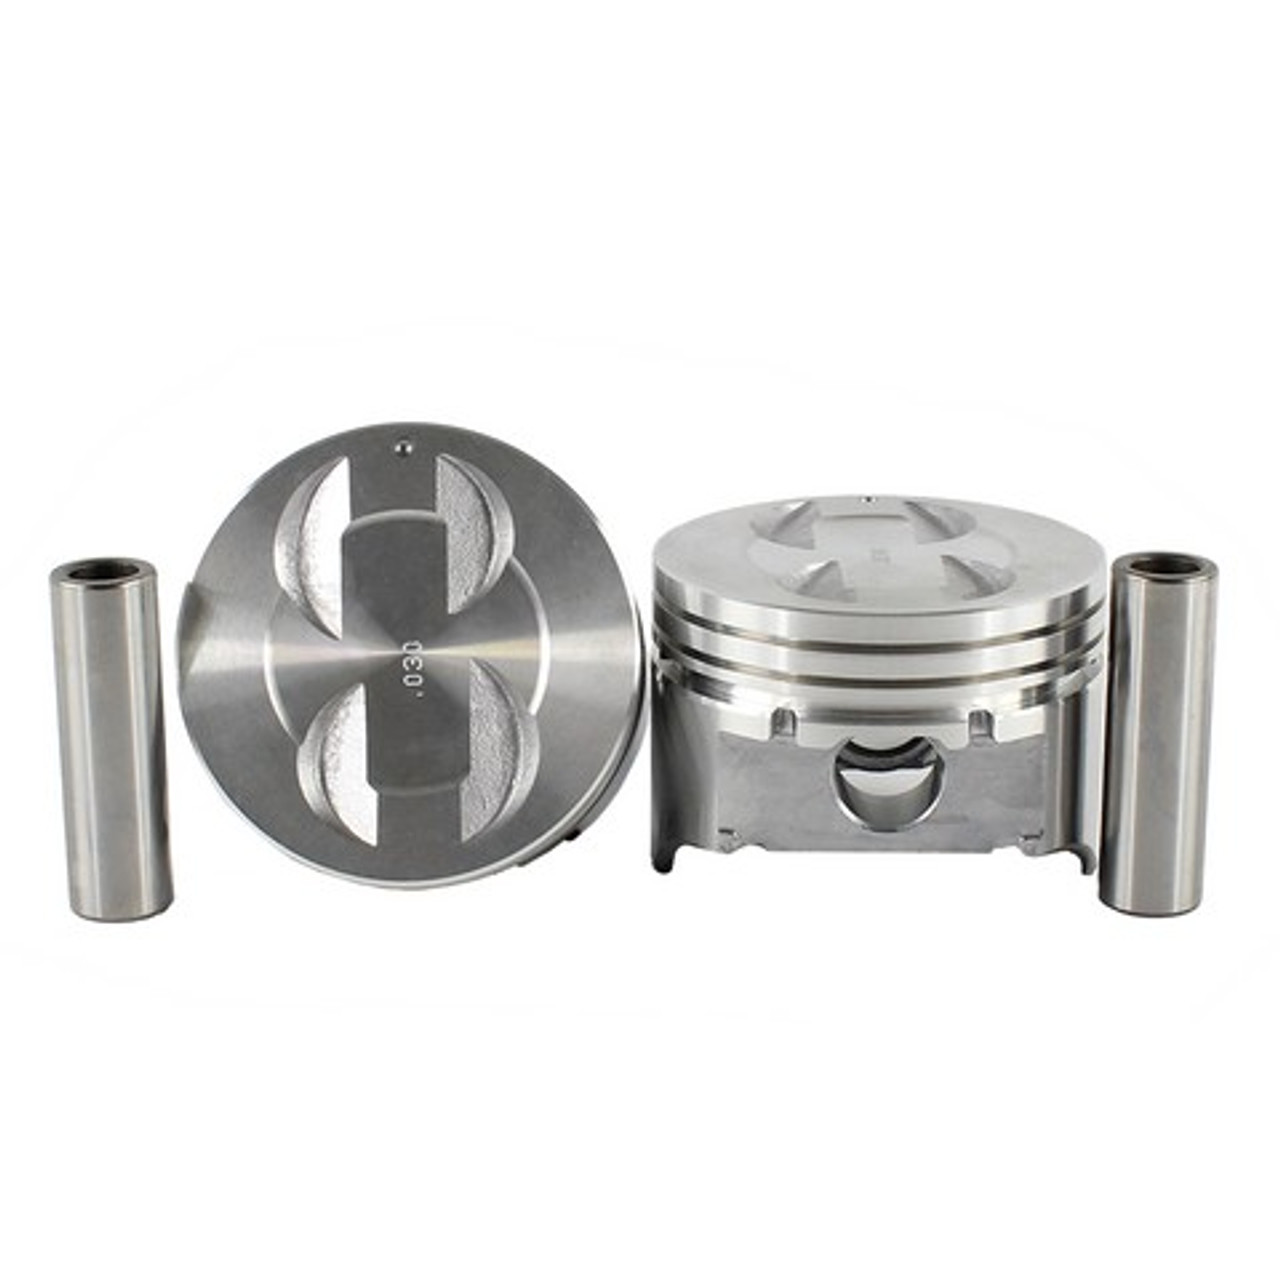 Piston Set 5.0L 1991 Ford Mustang - P4113A.54